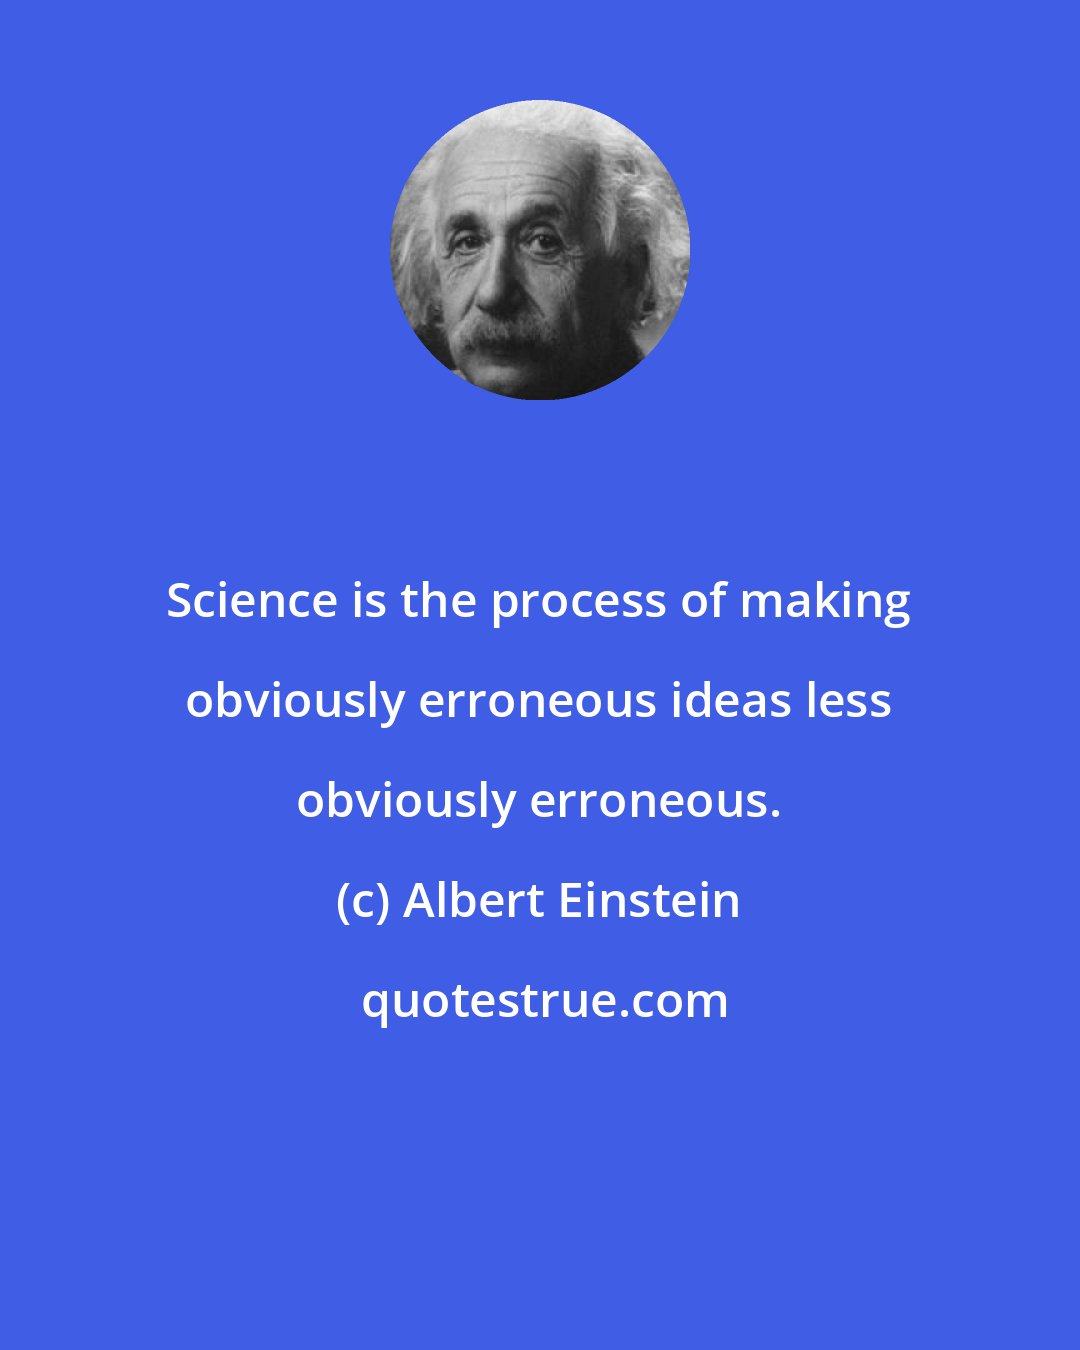 Albert Einstein: Science is the process of making obviously erroneous ideas less obviously erroneous.